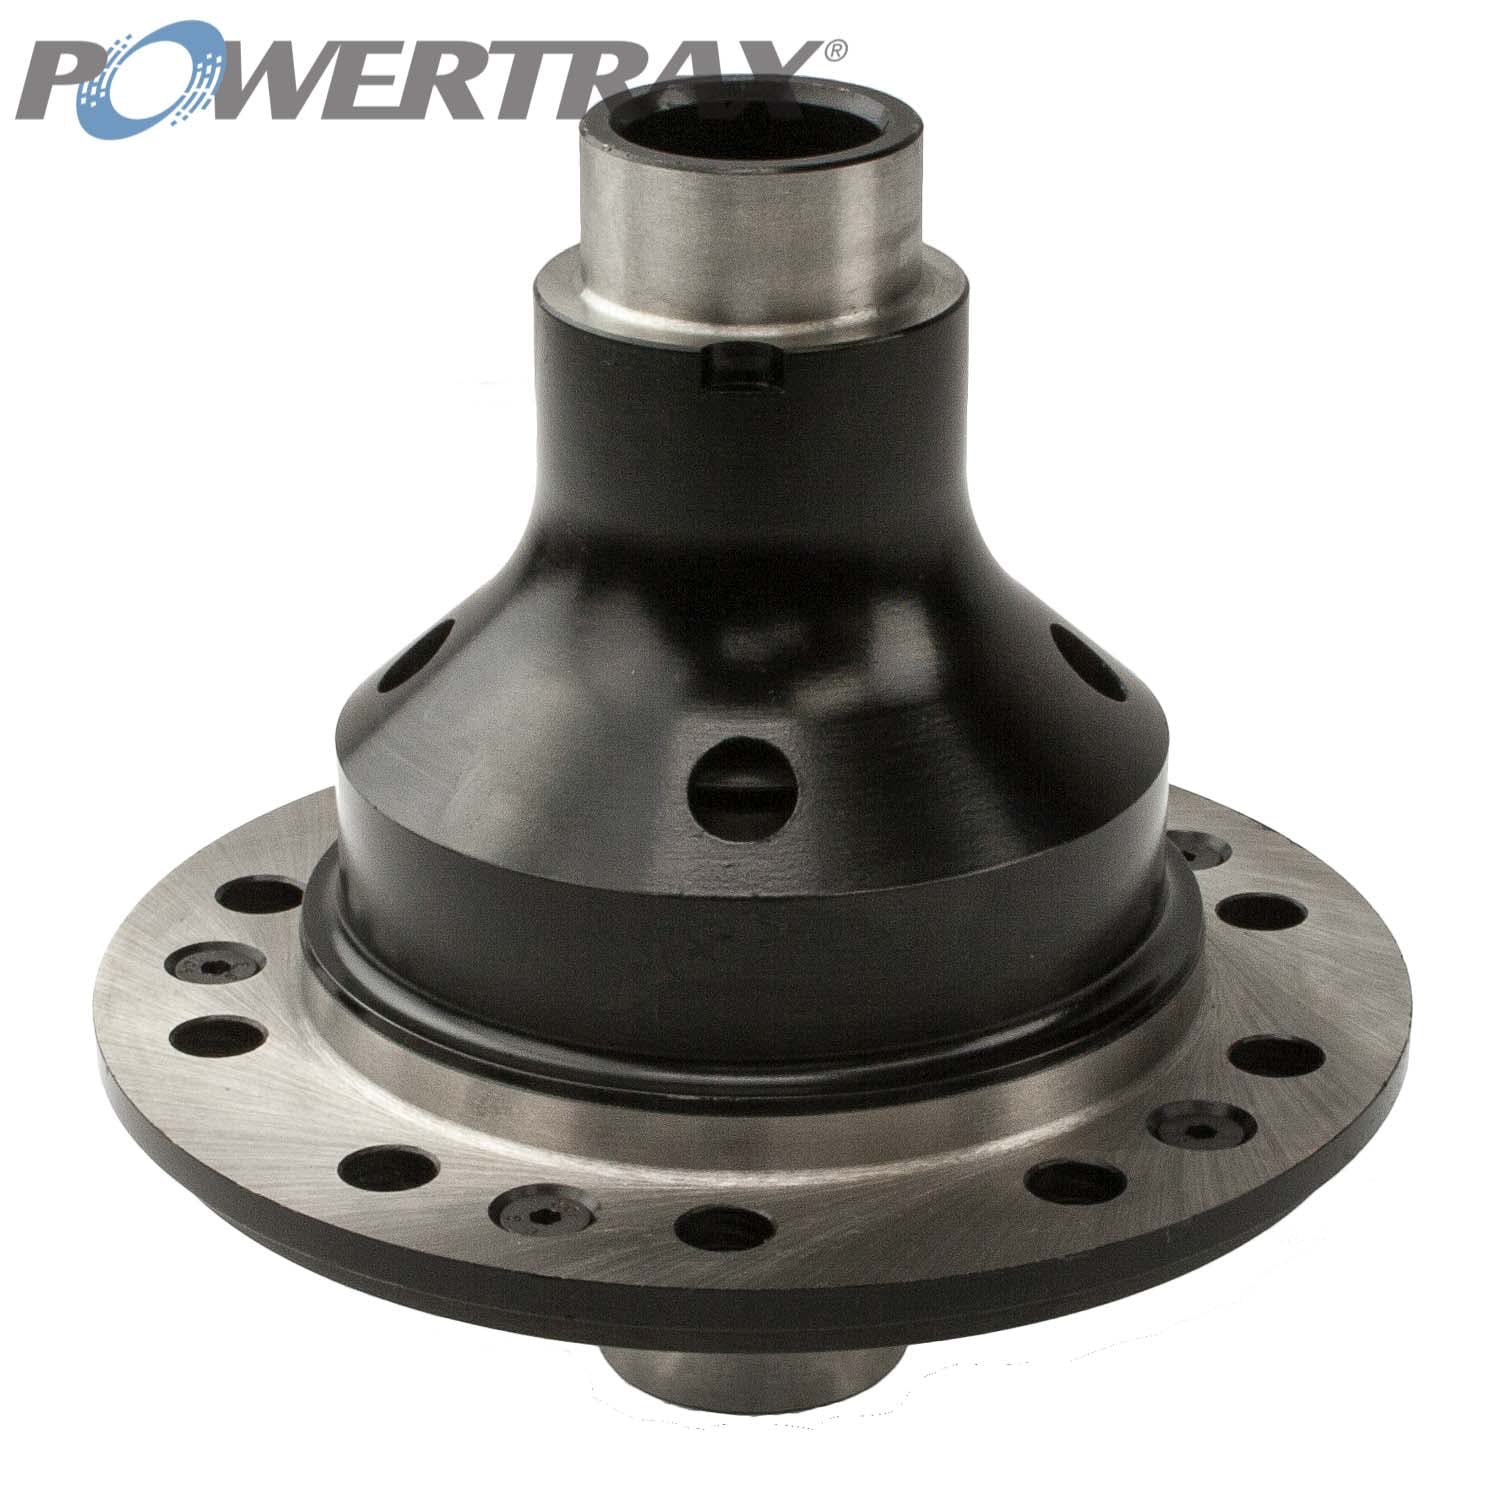 PowerTrax LK109031 Differential Lock Assembly